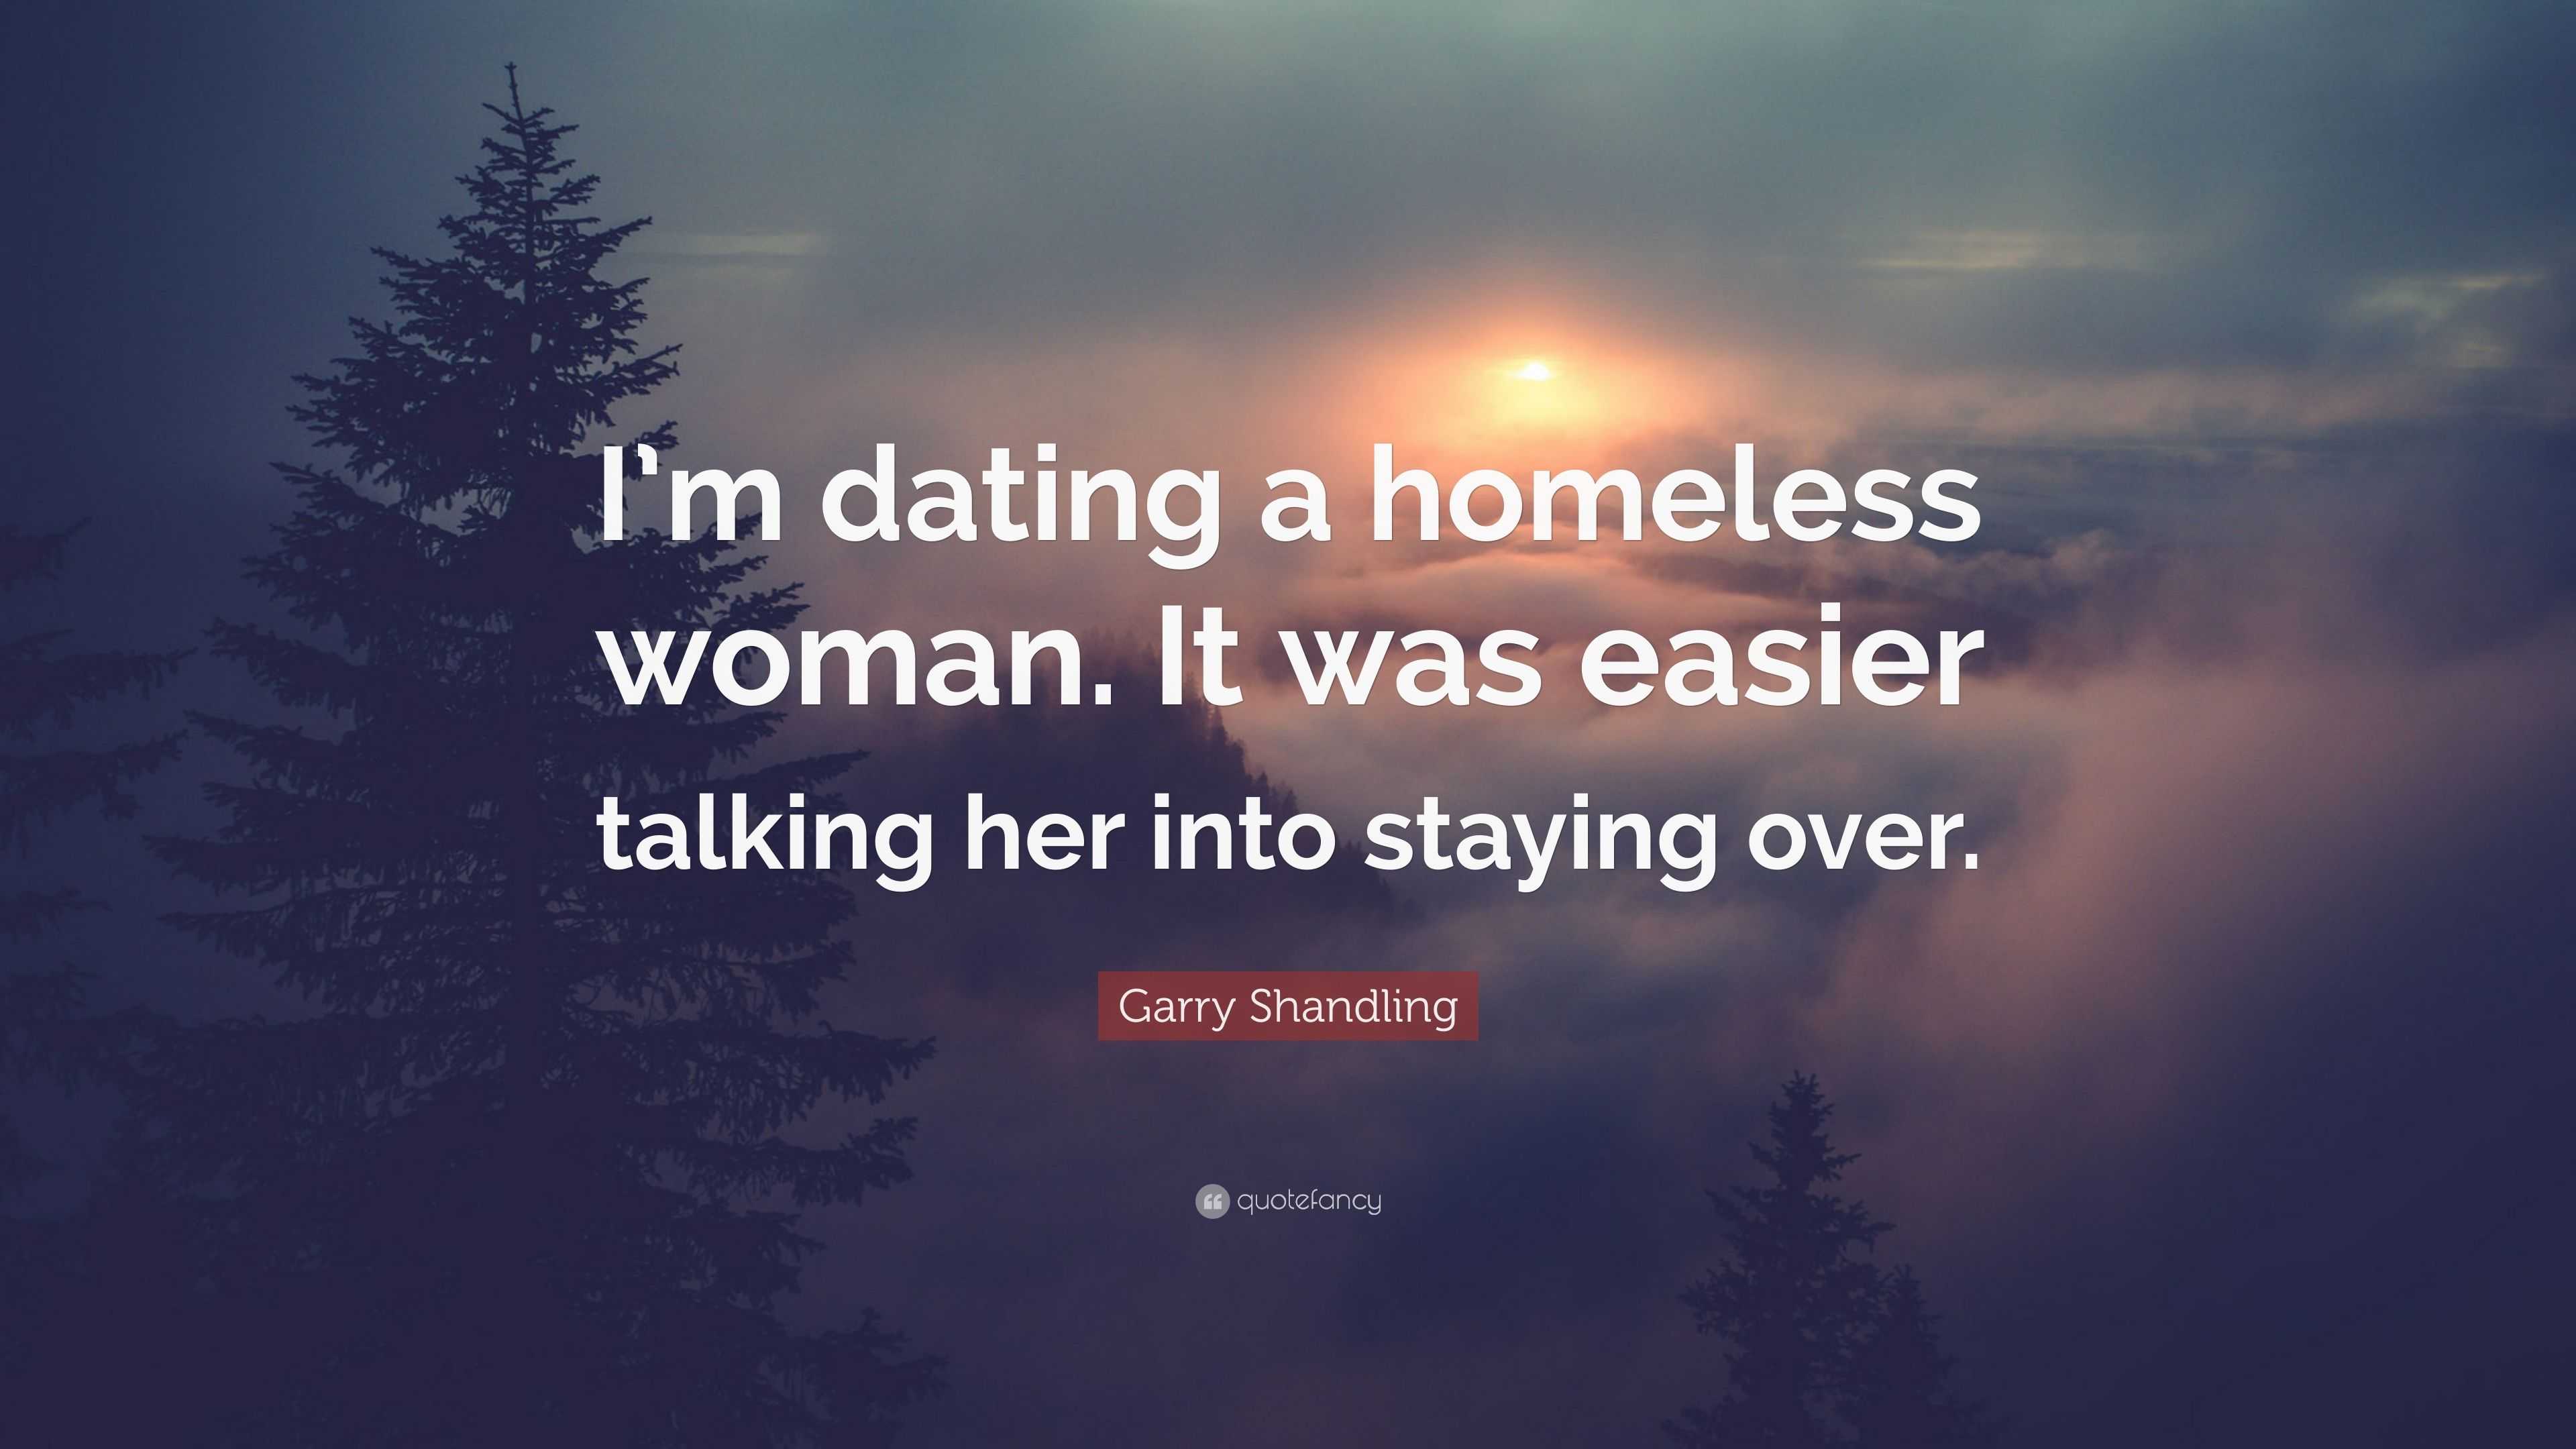 how to date a homeless woman